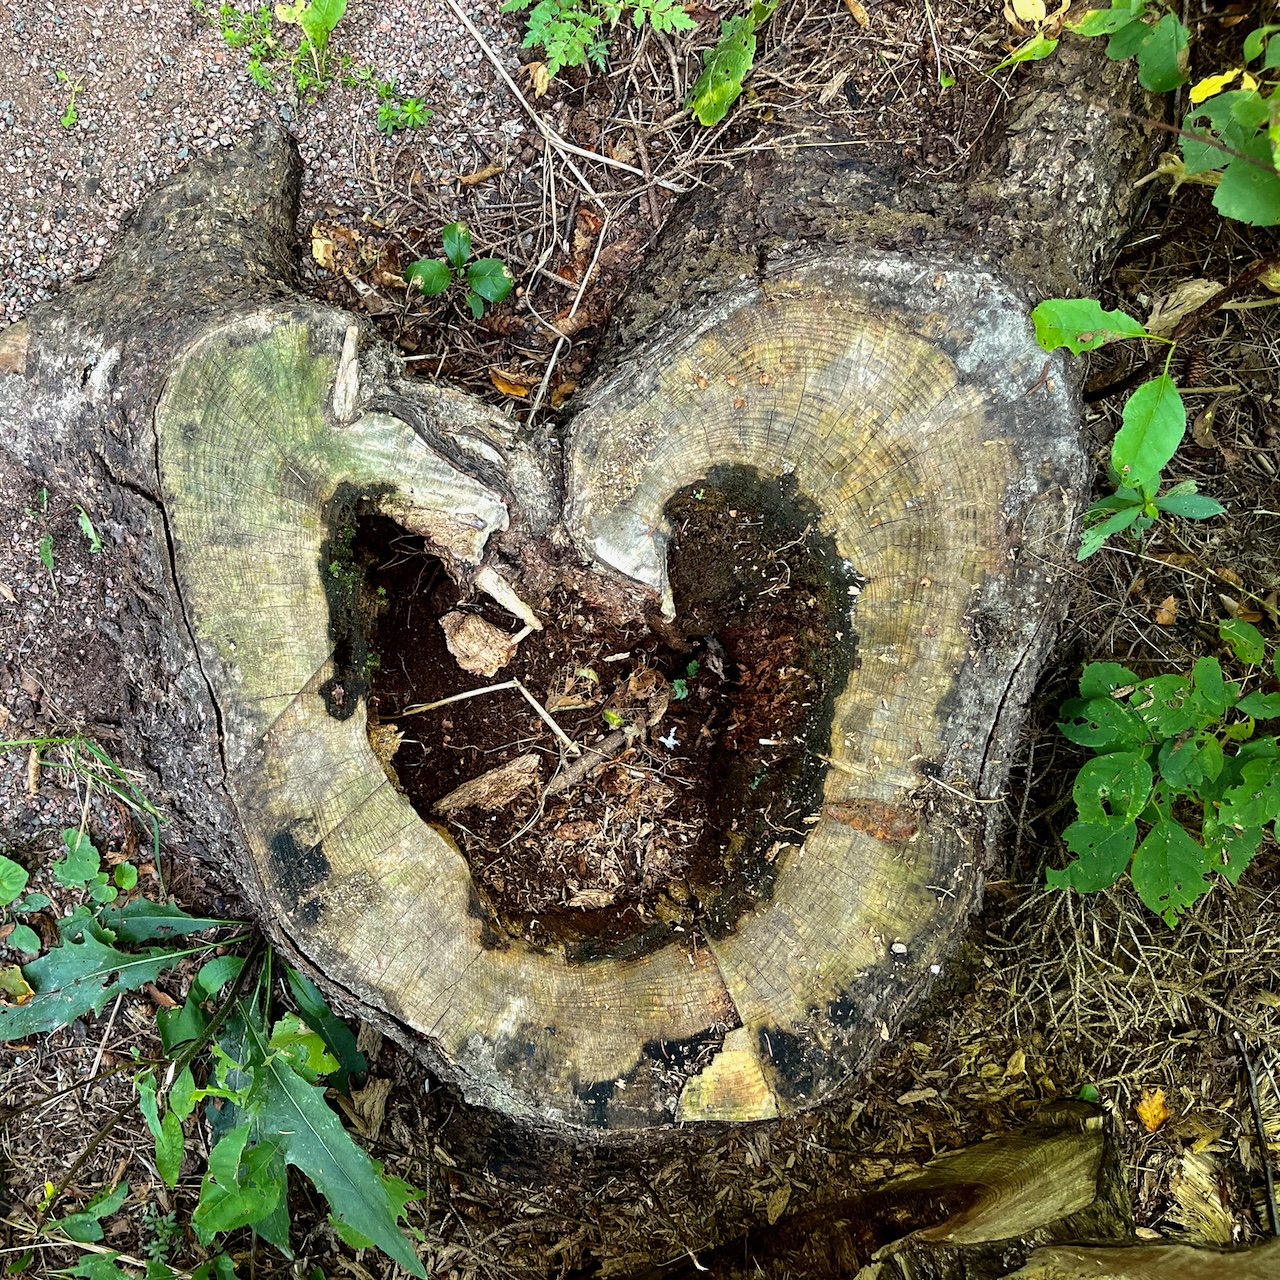 Found a heart stump while walking in the woods!